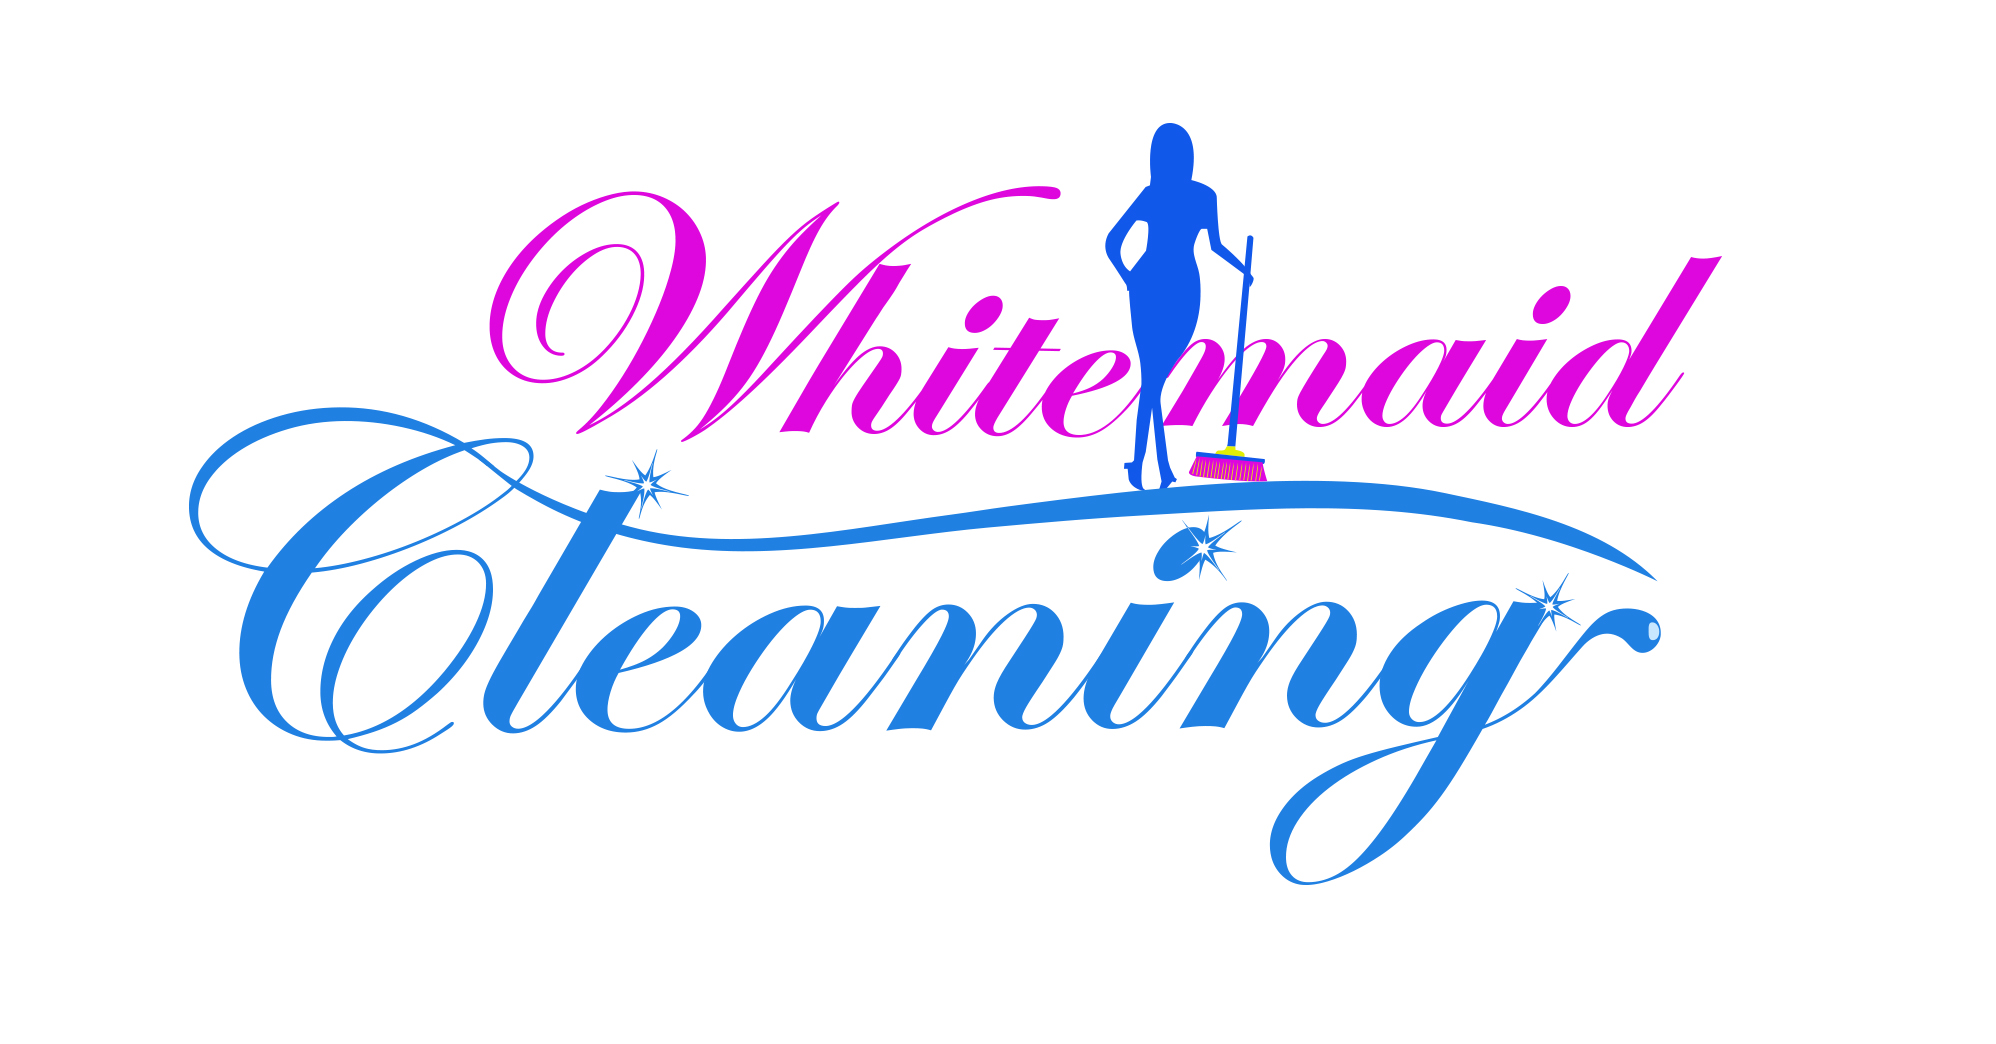 Whitemaid Cleaning Services LLC Logo